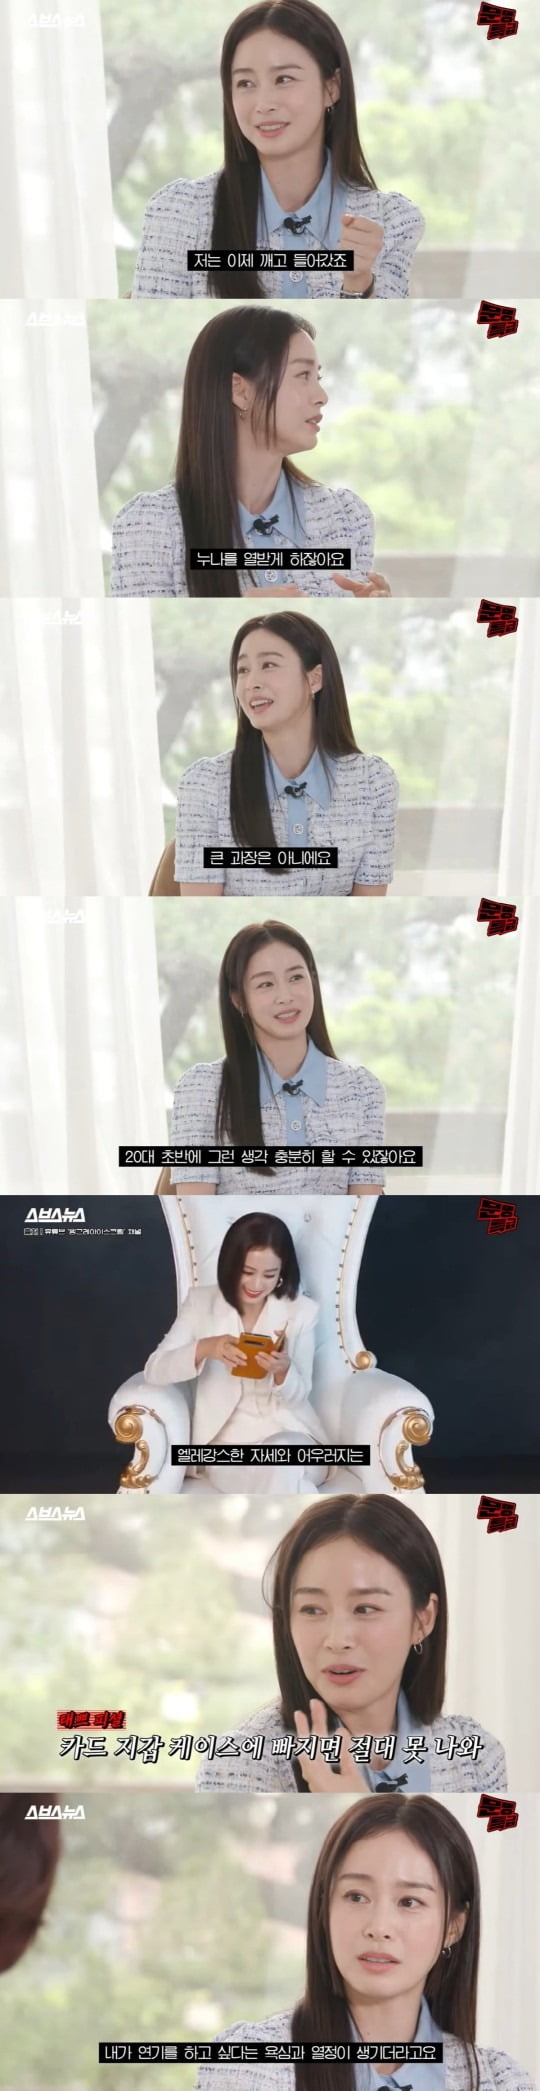 Actor Kim Tae-hee met viewers with candid talks.Recently, YouTube CivilizationMoonlighting Kim Tae-hee is worried about the kiss scene, is it true that the entertainer debut hesitated?Kim Sung-oh Choi Jae-rim also said, Please do not laugh.In the video released, Kim Tae-hee said, I have a nephew of a high school student, and he said its a YouTube program that I really enjoy subscribing to, and I said, I really want my aunt to go out sometime, but it came out, she said about the reason why she appeared in entertainment shows for the first time in 13 years.On this day, Kim Tae-hee talked about her school days, saying that she ran from school to home to study quickly. Kim Tae-hee replied, I saved my time, but there were many friends who saved more than me.Kim Sung-oh said, Its like a story on a webtoon. It doesnt seem to exist in reality.He also confessed that he was a childhood tomboy. The biggest Victims was a pro-brother and actor Lee Wan. He always talked with his feet without talking.Brother once closed the porch door and I broke in. He said, Brothers always piss my sister off. There was a bicycle that I really cared about. But a boy who lived on the first floor kept ringing the bell, which had music that I didnt press very often because I didnt care about it. I kept listening to it on the second floor and couldnt stand it, so I went down and punished him.Kim Tae-hee also announced that she had debuted the entertainment industry through street casting. Its not a big exaggeration, he said. Some sister who happened to meet me on the subway gave me a business card and it was a designer title for a famous advertising company Ive heard of.So this sister contacted me because I thought I could trust her, and I met her manager. Finally, Kim Tae-hee used a phone case of her mothers taste to induce laughter. Kim Tae-hee said, Once you get here, you can not do anything else.I can put all kinds of things, I do not need a wallet, I just need to get one. 